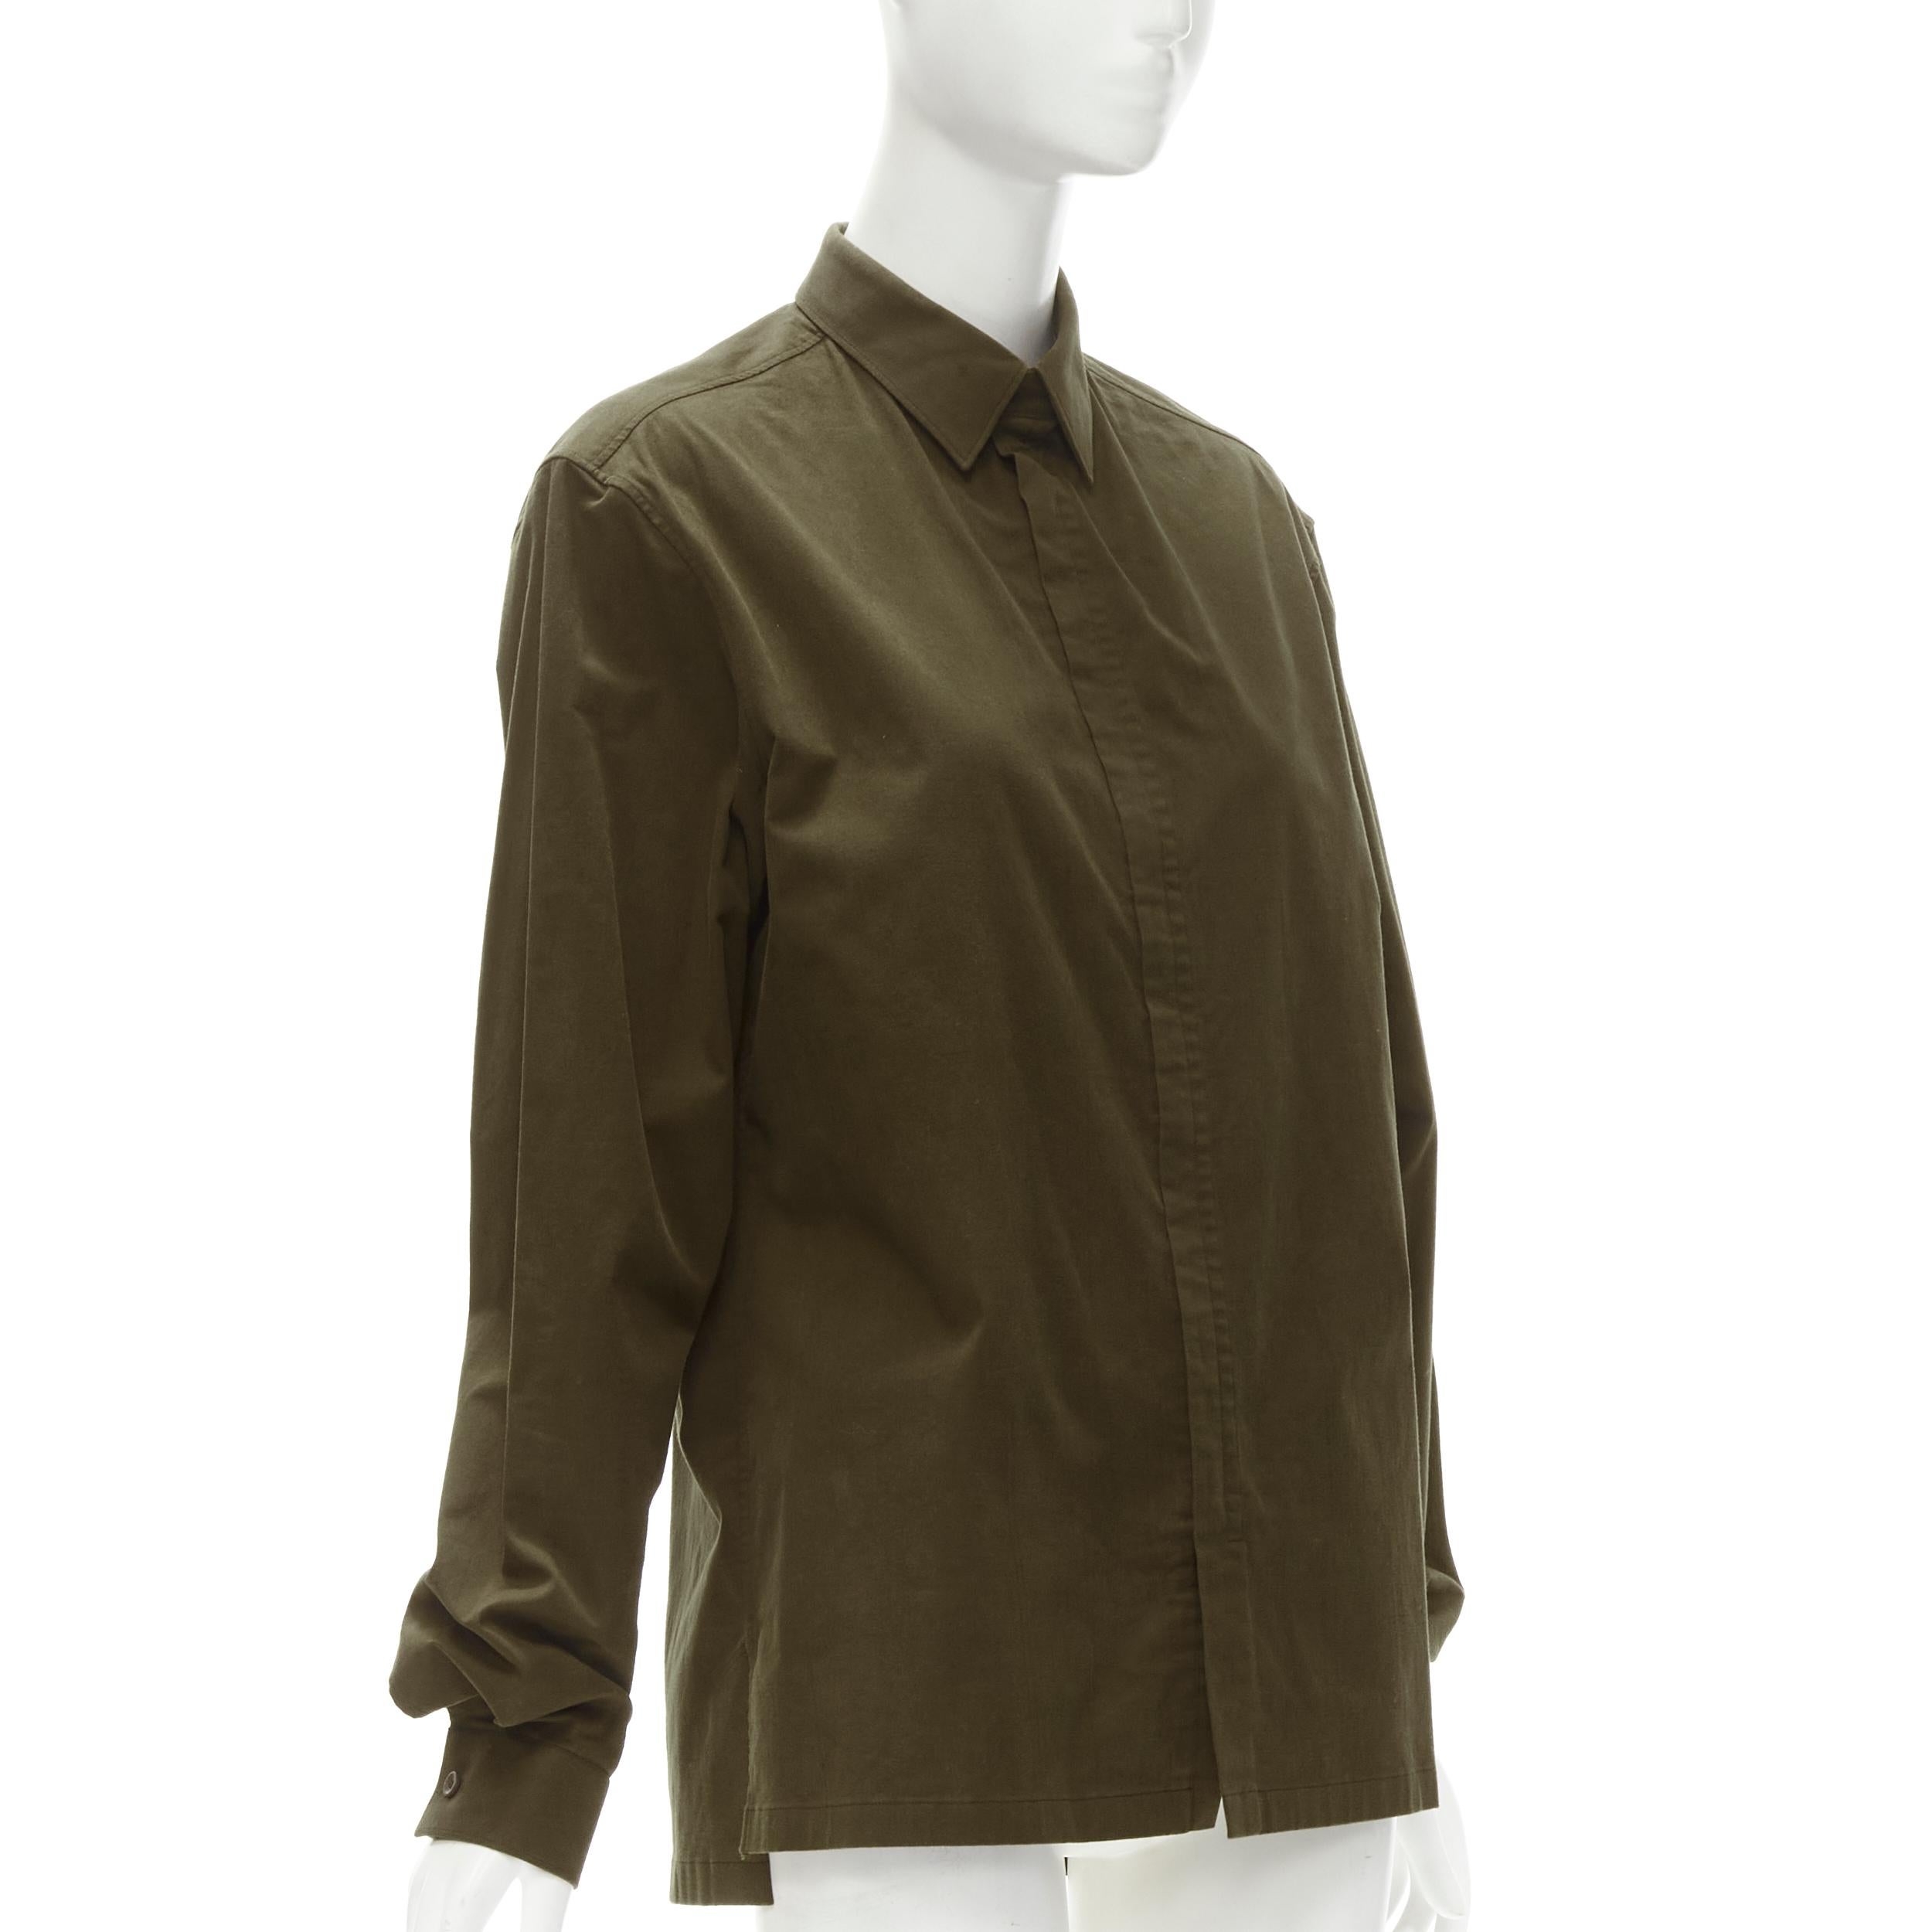 BALENCIAGA army green cotton-blend concealed zip front shirt EU38 S
Brand: Balenciaga
Material: Cotton
Color: Green
Pattern: Solid
Closure: Zip
Extra Detail: Army green/brown cotton-blend. Shirt collar with tab button. Concealed front zip. Center